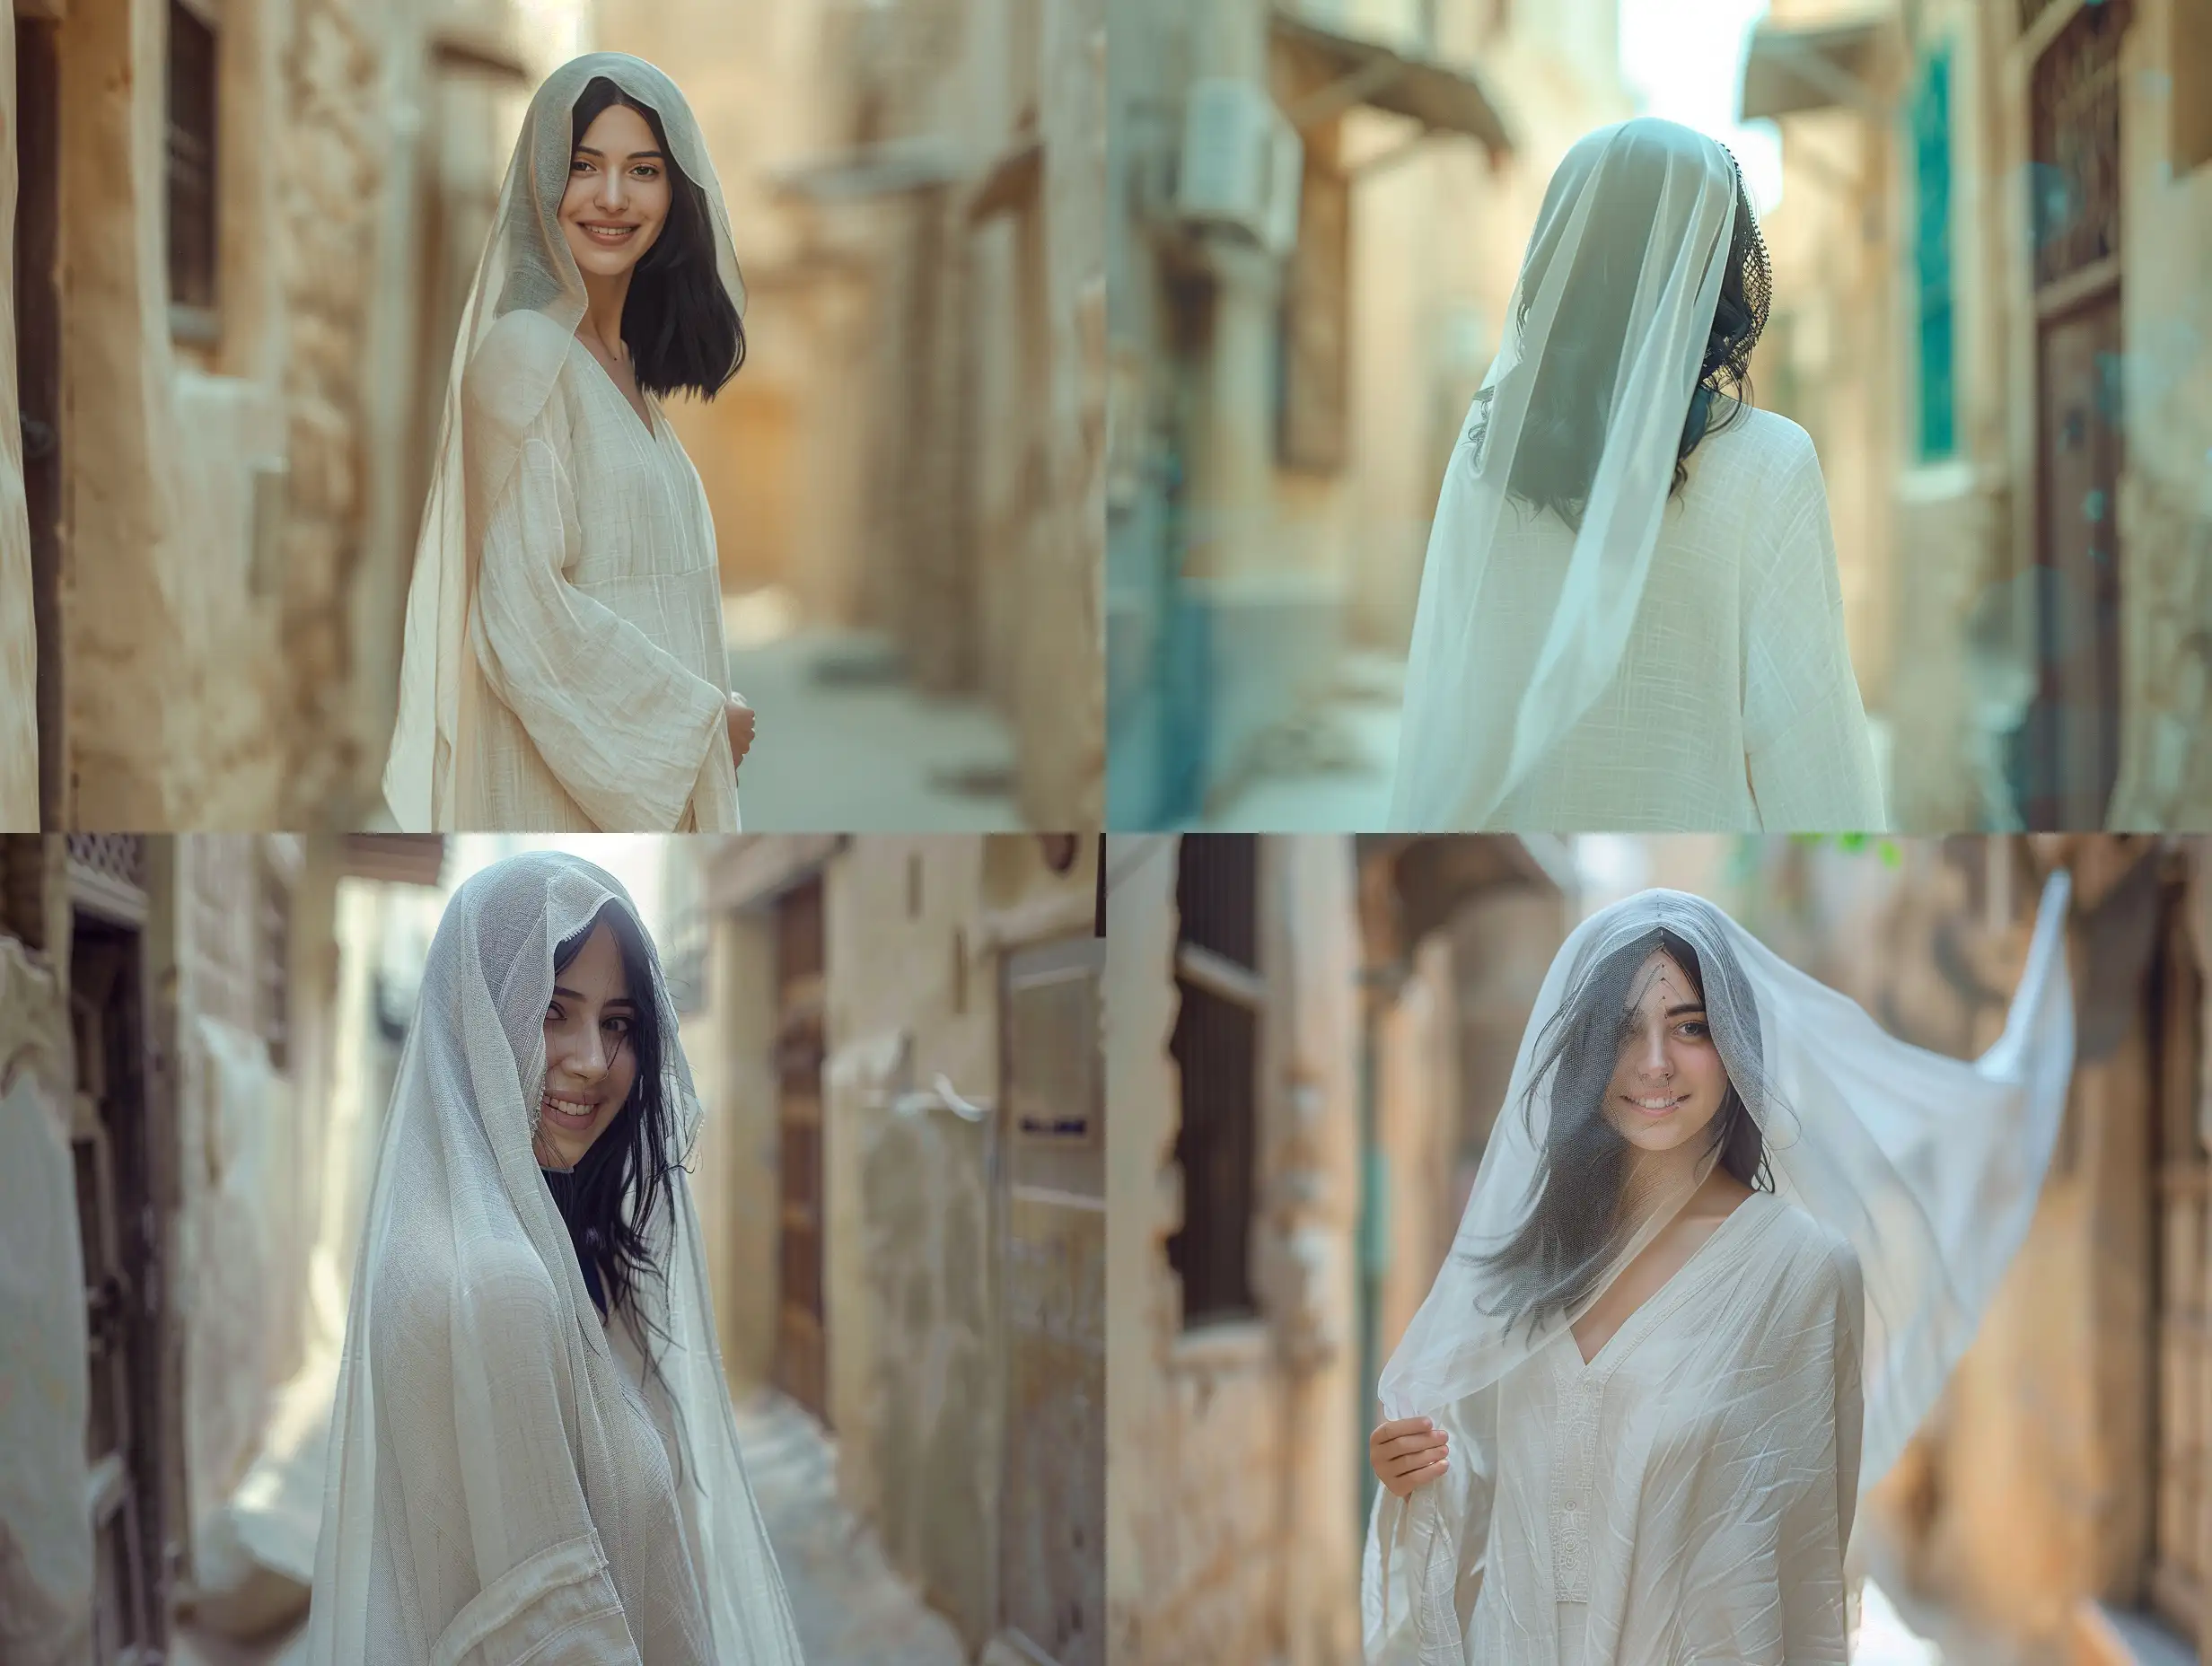 A happy woman with medium-length black hair, wearing a long white summer abaya without patterns made of linen fabric with a veil covering some of her head, wandering through the alleys of Jeddah Al-Balad. Full HD 4K photorealism, Landscape, Photorealism, Cinema 4D, Panoramic Angle Perspective, Solid Colors, Instant Camera, Natural Light, Nostalgia,
